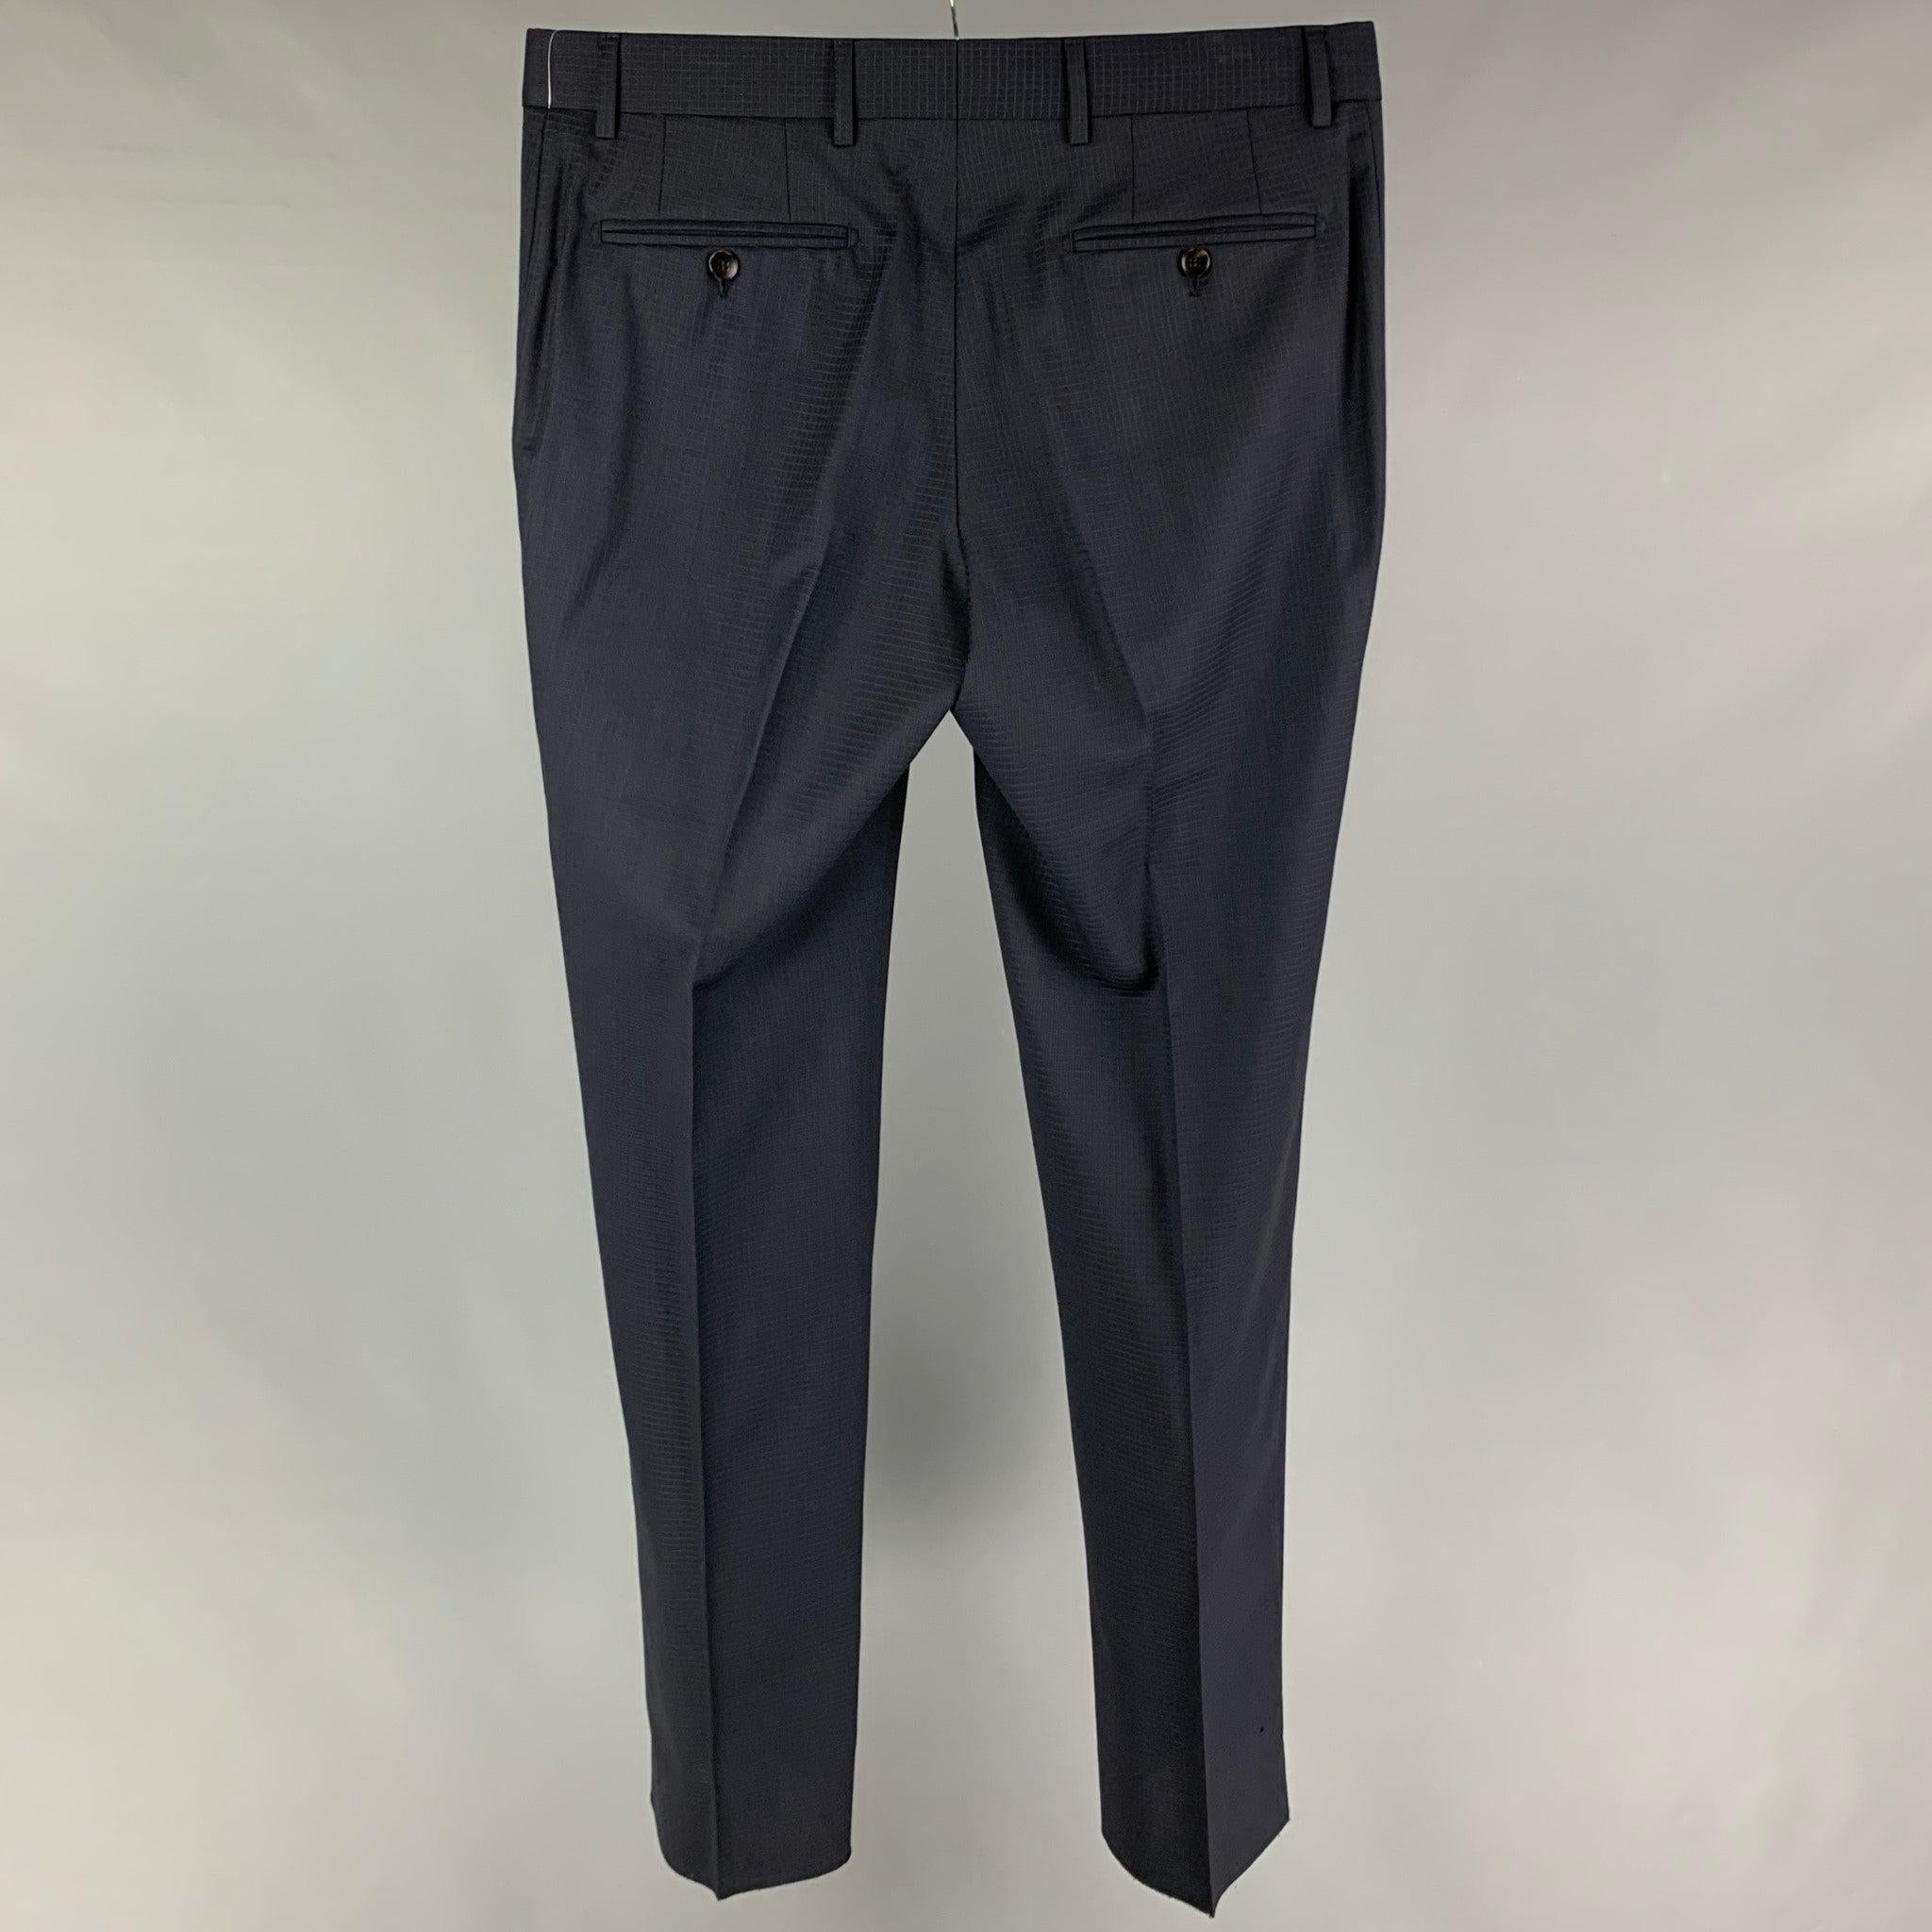 GUCCI dress pants comes in a navy checkered wool featuring a flay front, front tab, and a zip fly closure.
 Excellent
 Pre-Owned Condition. 
 

 Marked:  50 R  
 

 Measurements: 
  Waist: 36 inches Rise: 9 inches Inseam: 36 inches 
  
  
  
 Sui